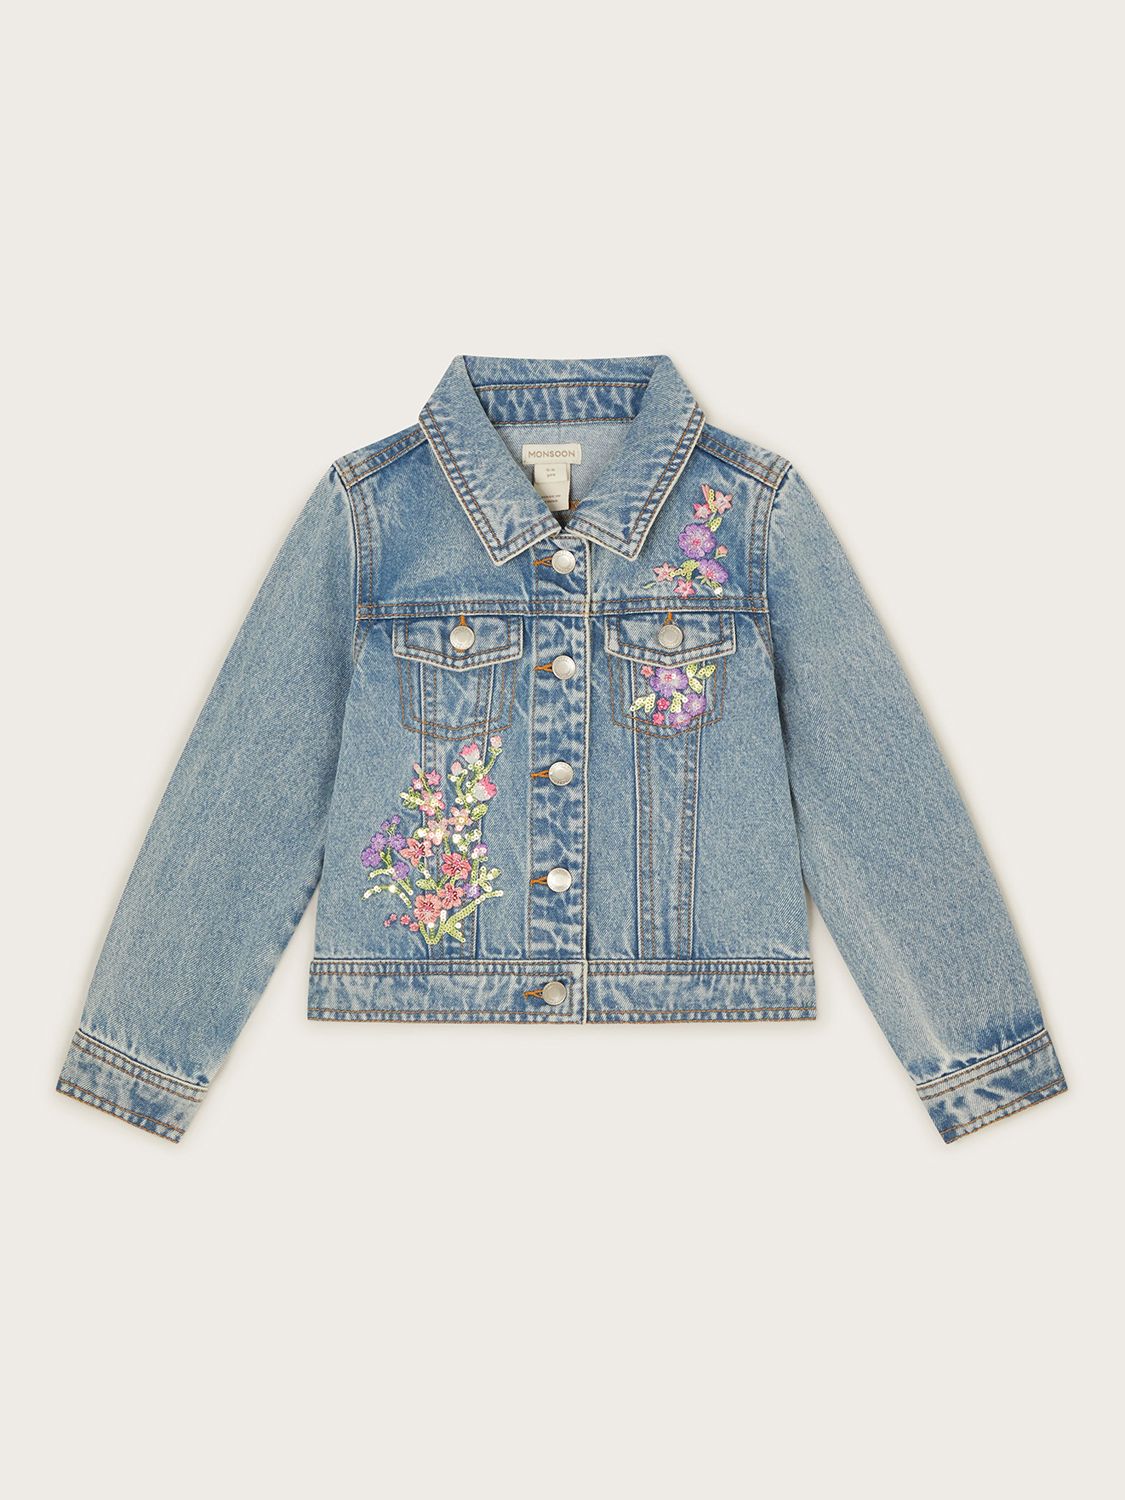 Monsoon Embroidered Floral Denim Jacket, Blue, 3-4 years